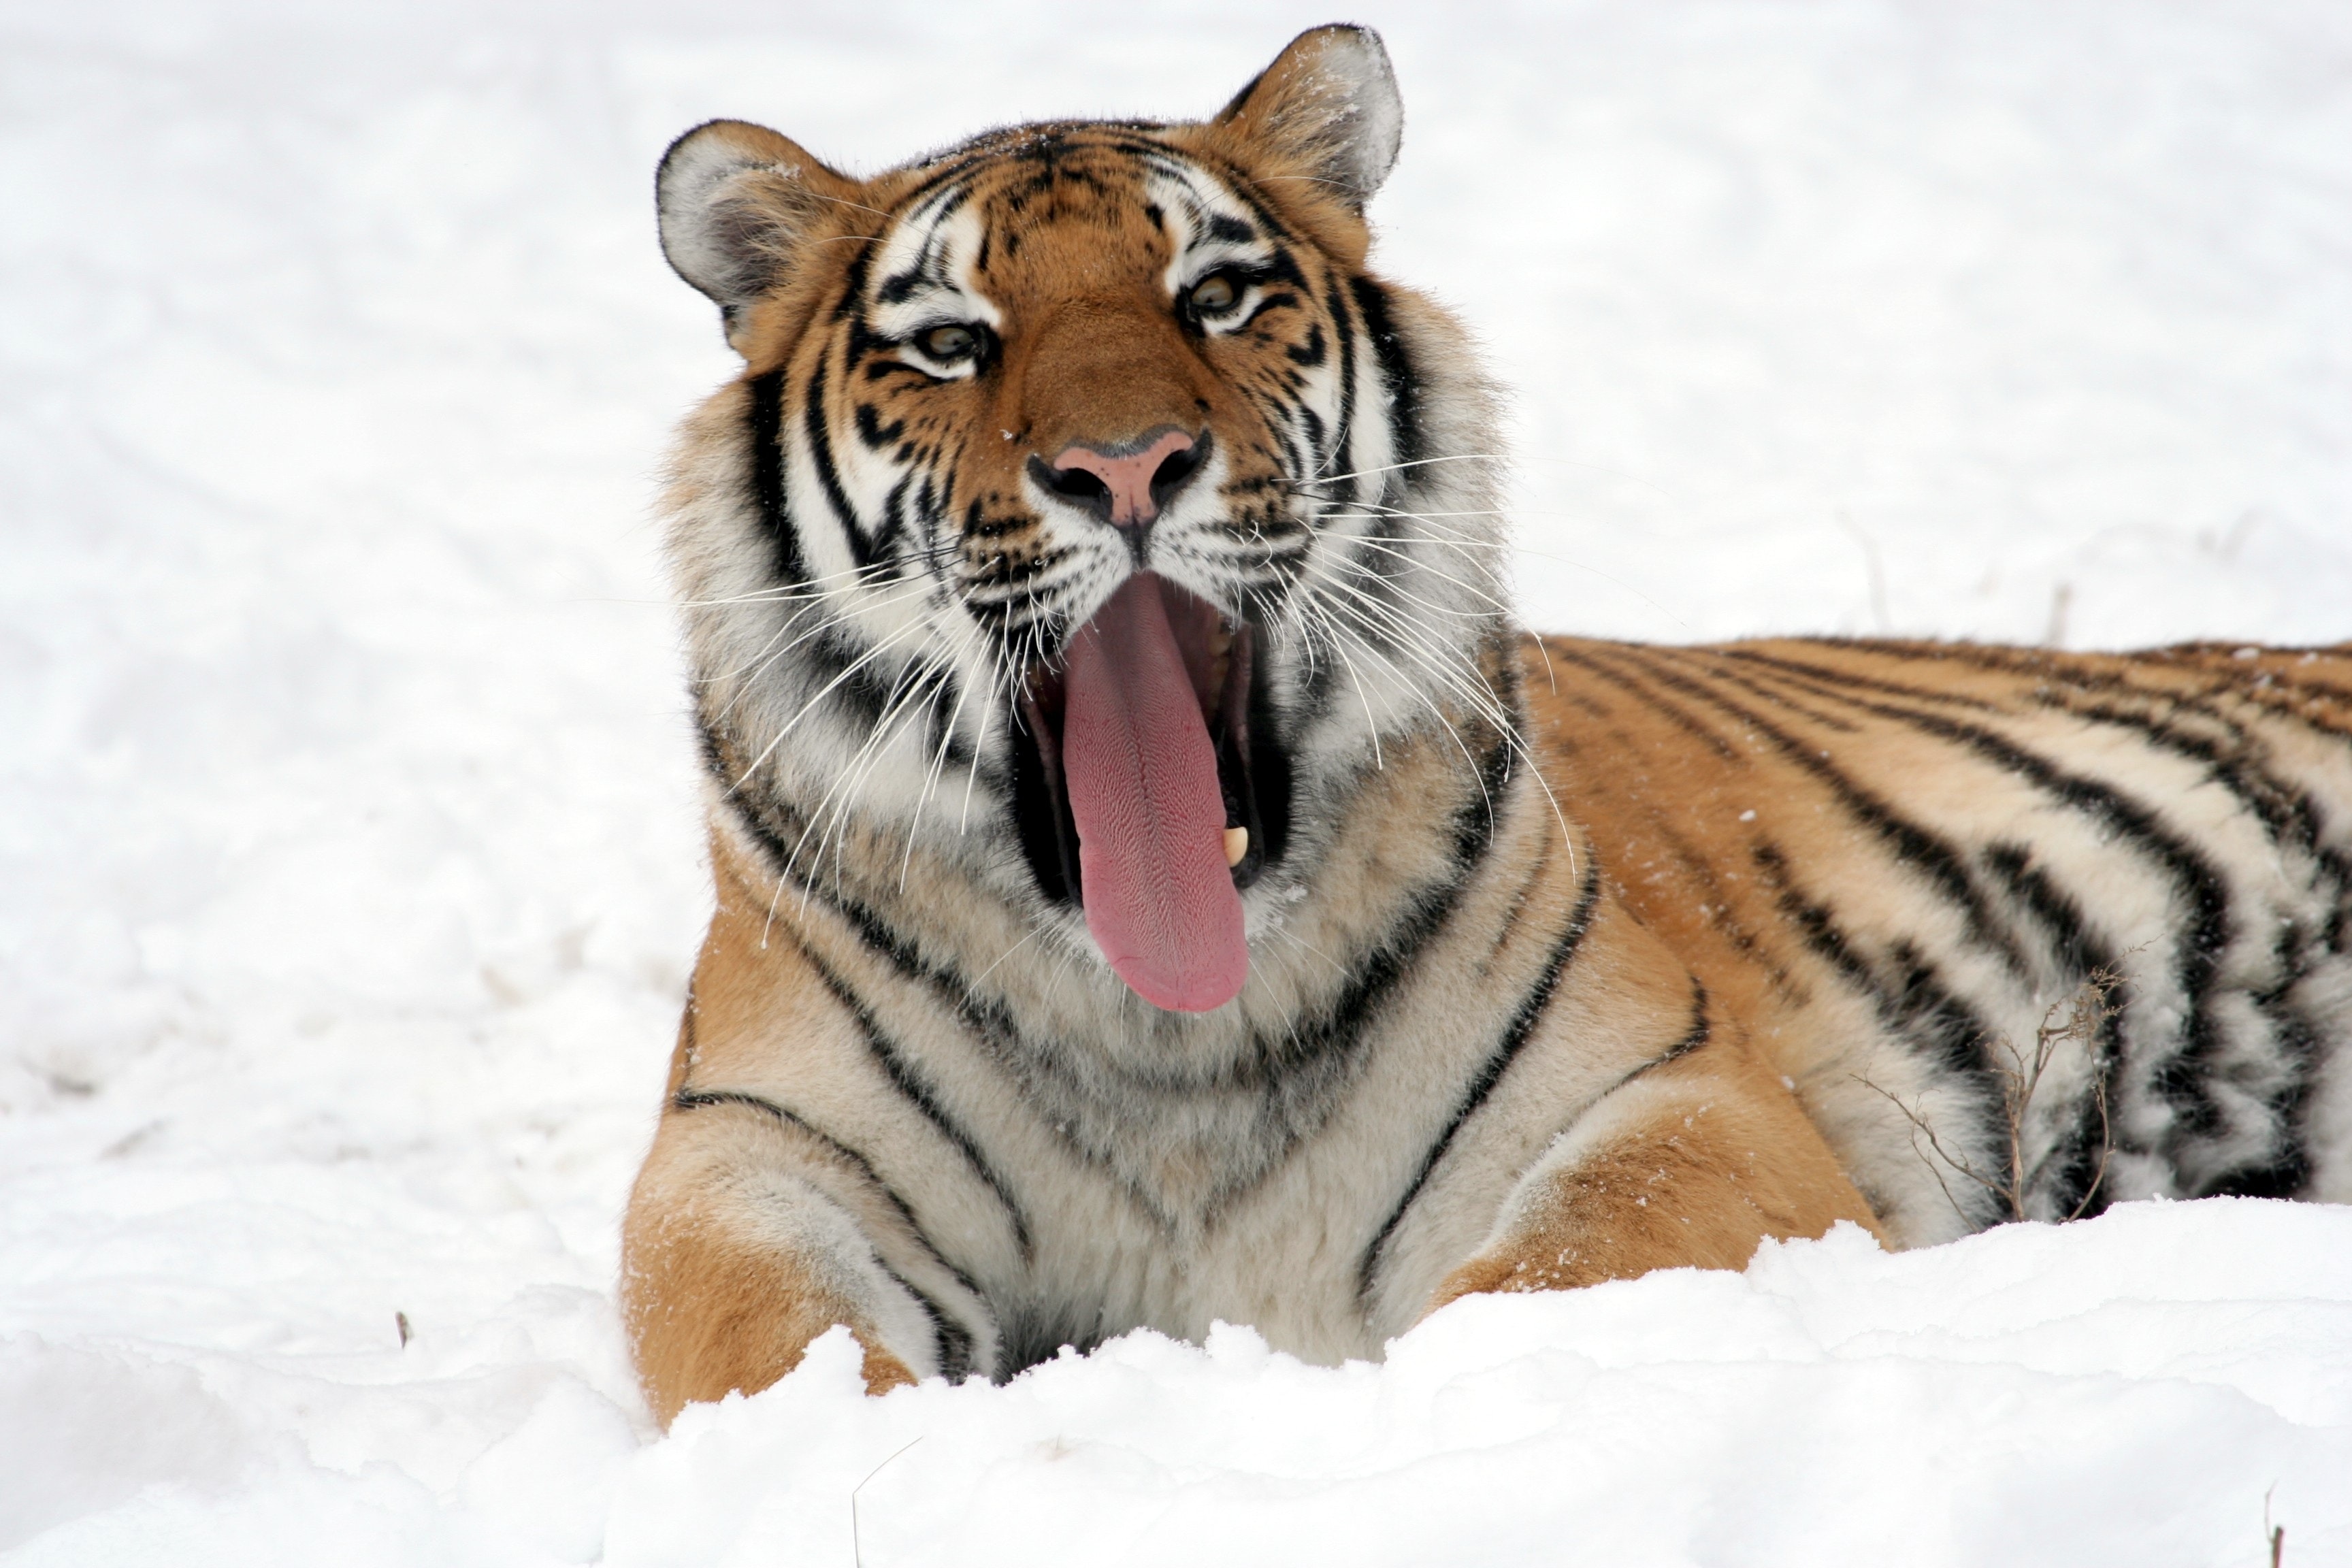 Tiger lying on snow field while yawning photo